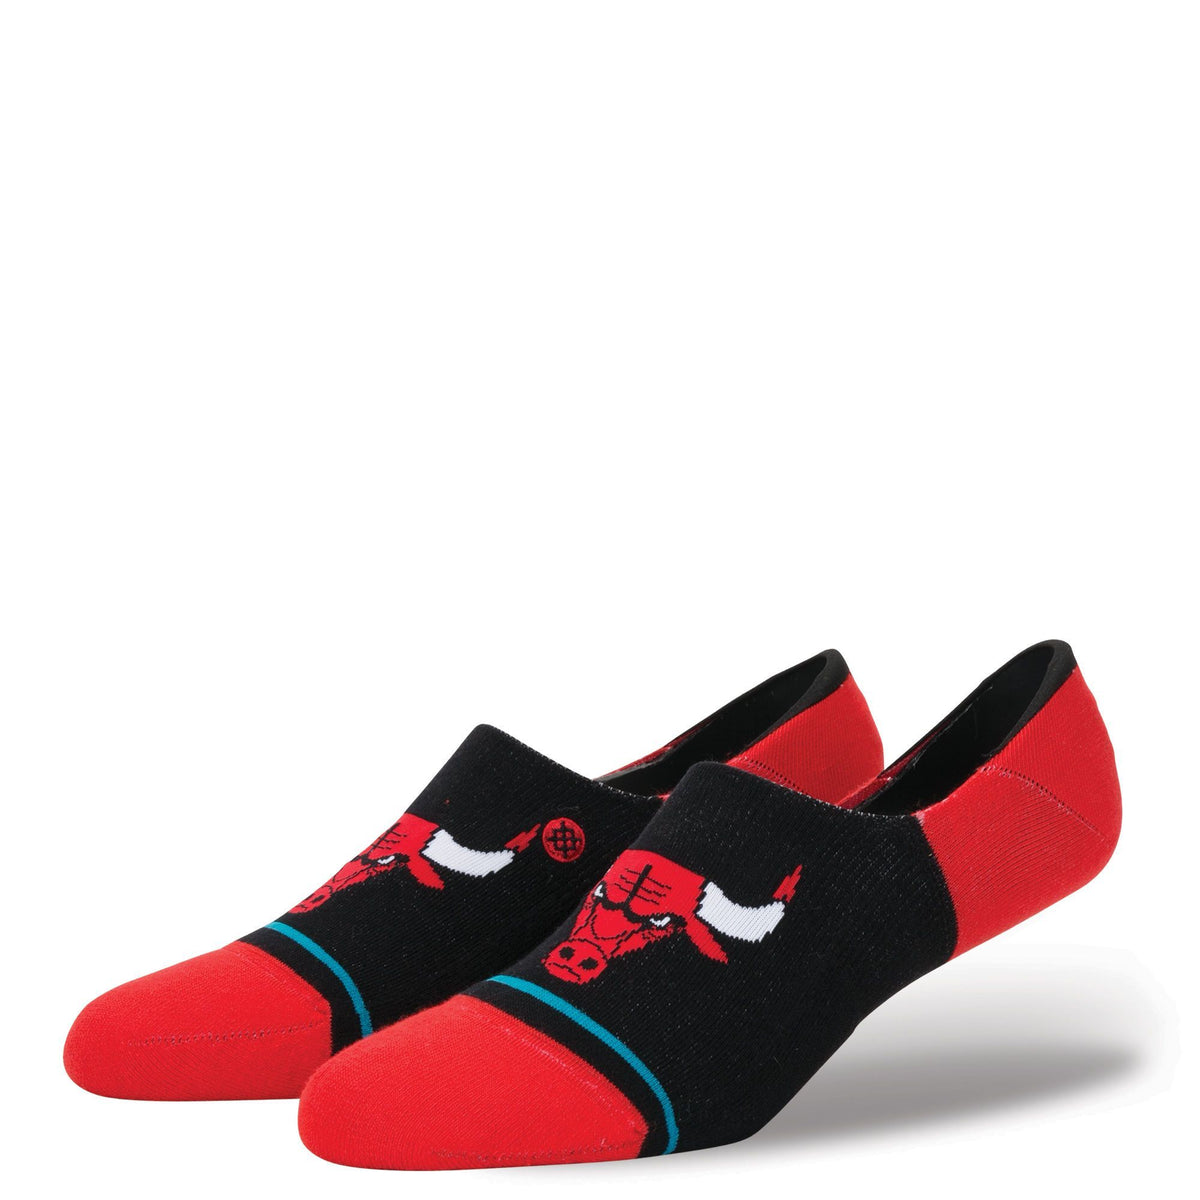 ACCESSORIES - Stance Socks NBA Chicago Bulls Invisible Red M115A18BUL-RED